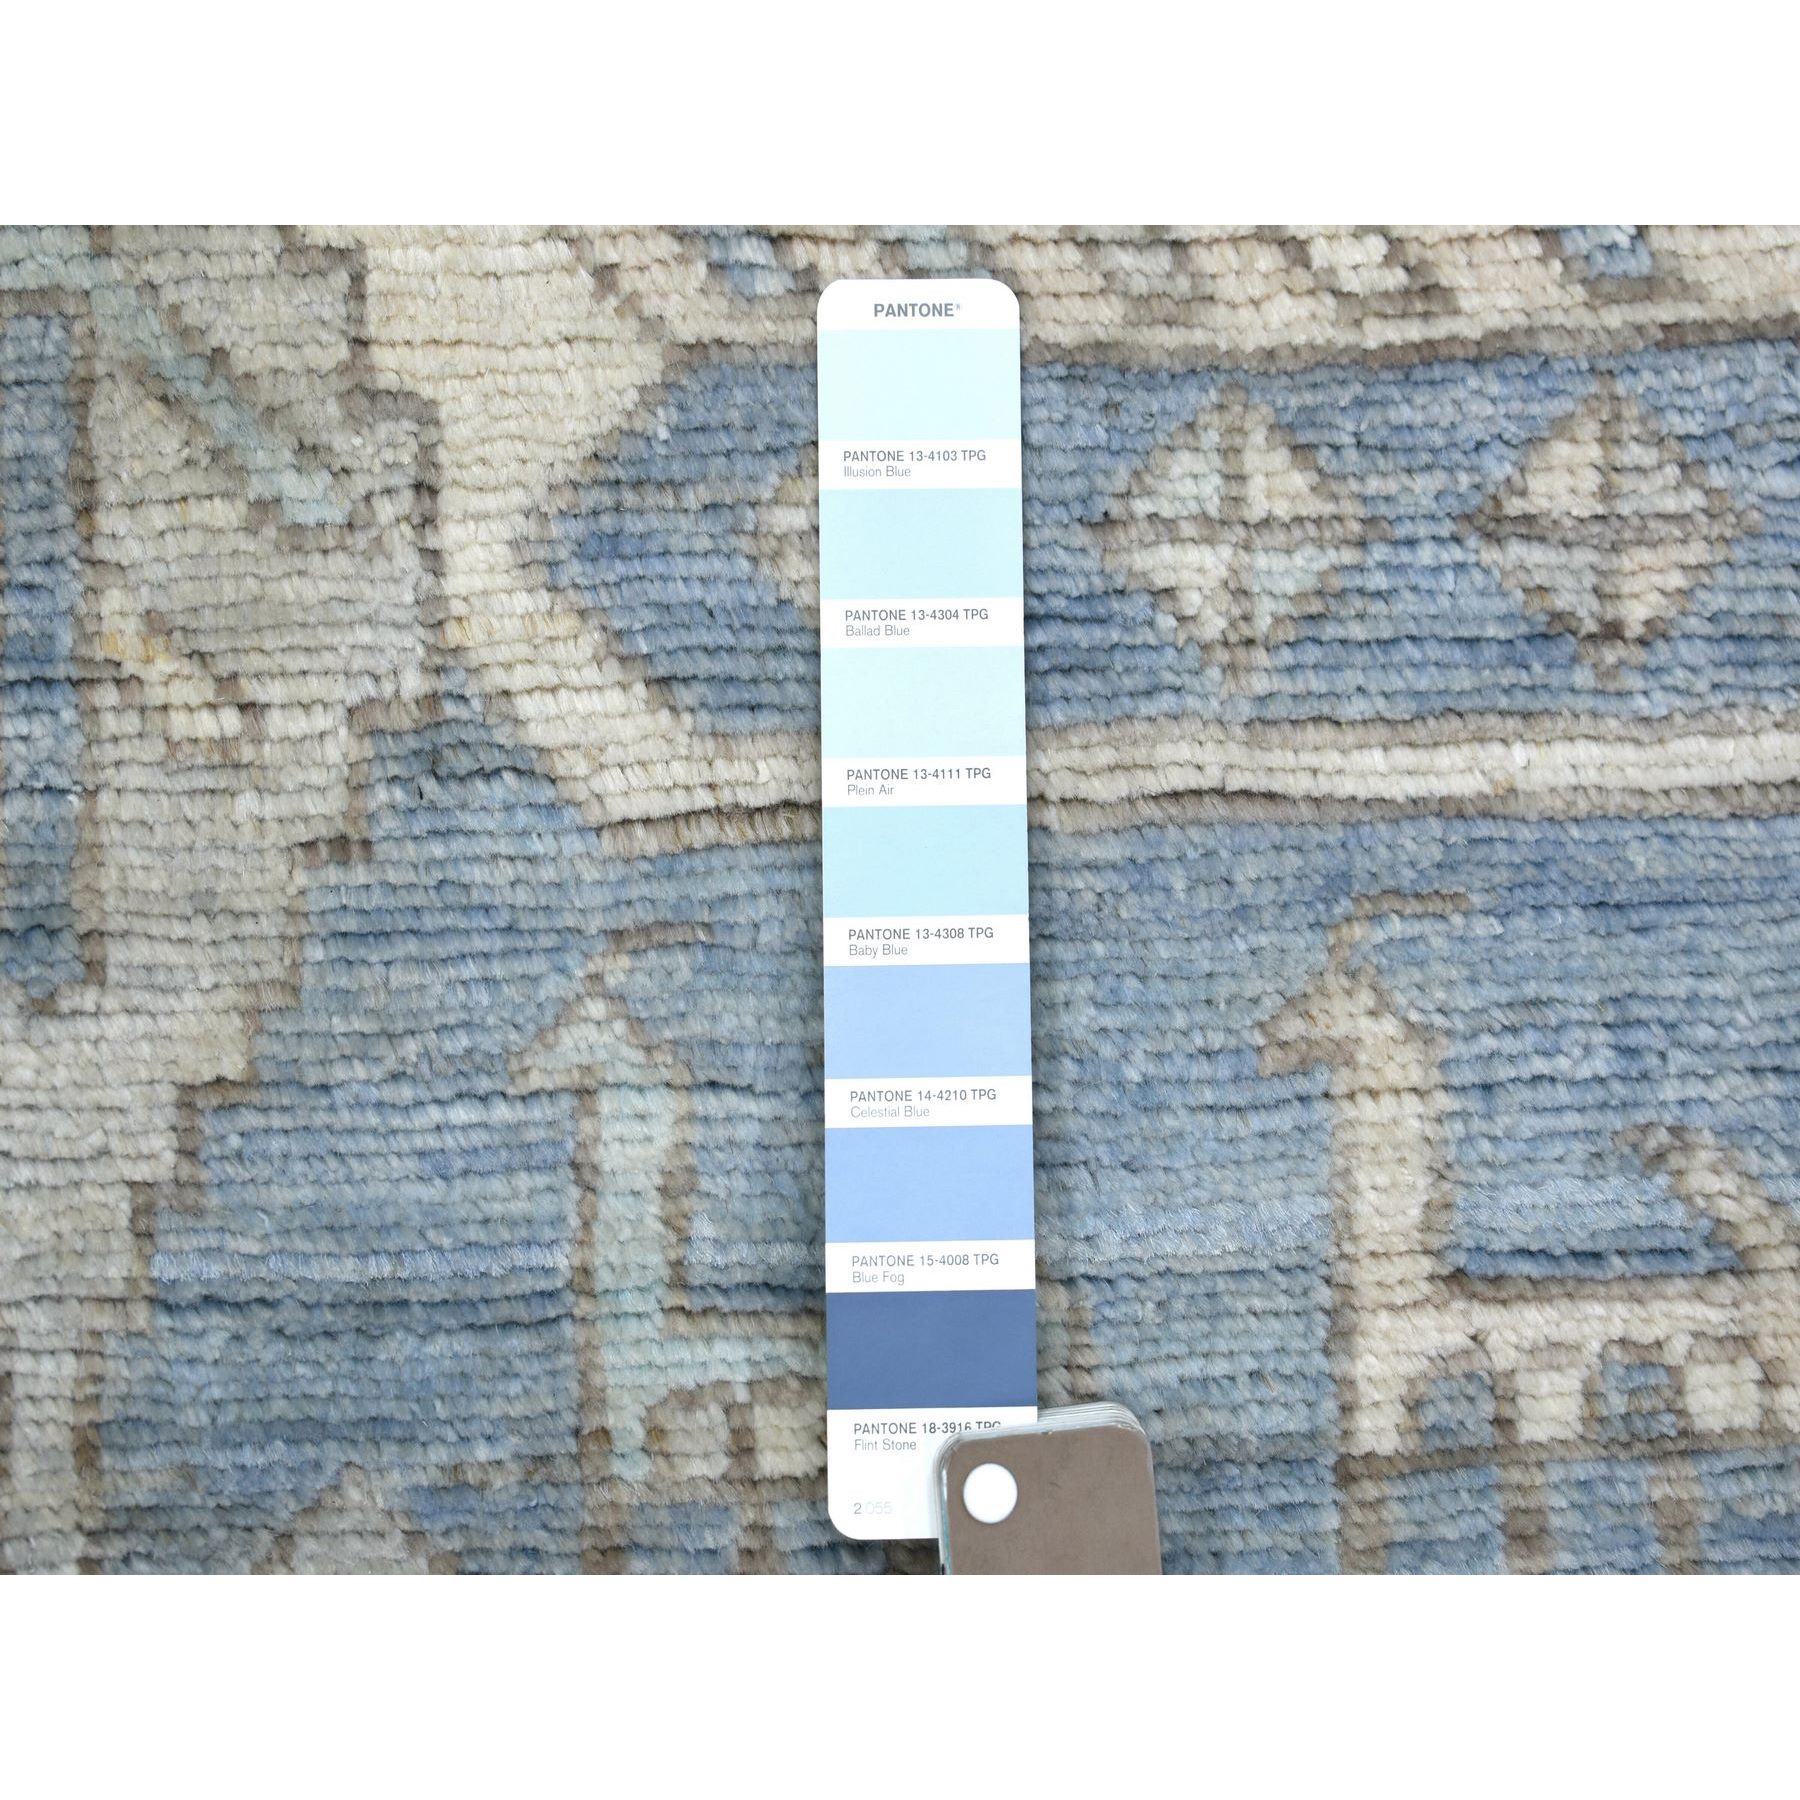 3'10"x8'8" Light Blue, Hand Woven Anatolian Village Inspired Geometric Medallion Design with Animal Figurines, Natural Dyes Pure Wool, Wide Runner Oriental Rug 